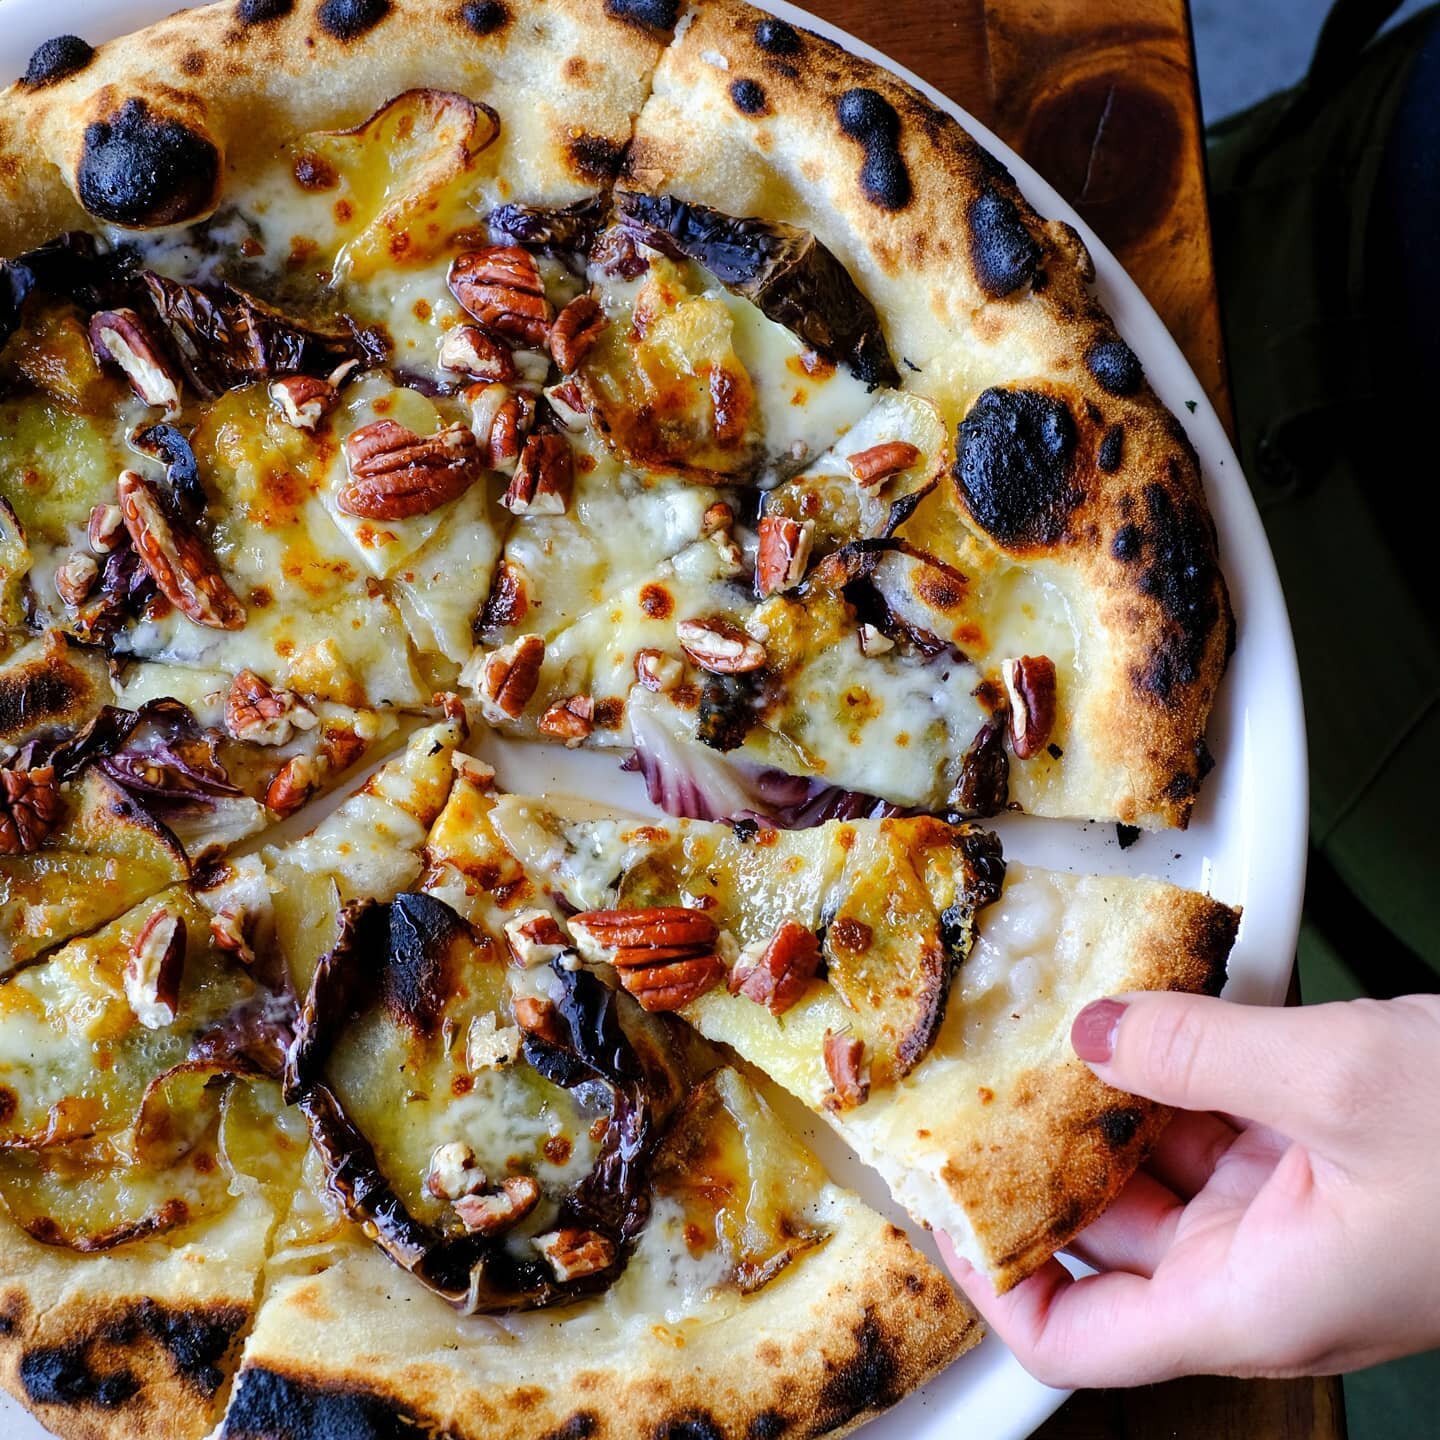 Potatoes &amp; Blue cheese are a match made in heaven, on top if a bed of raddichio, finished with some pecans and fermented honey🍠🍯🍕